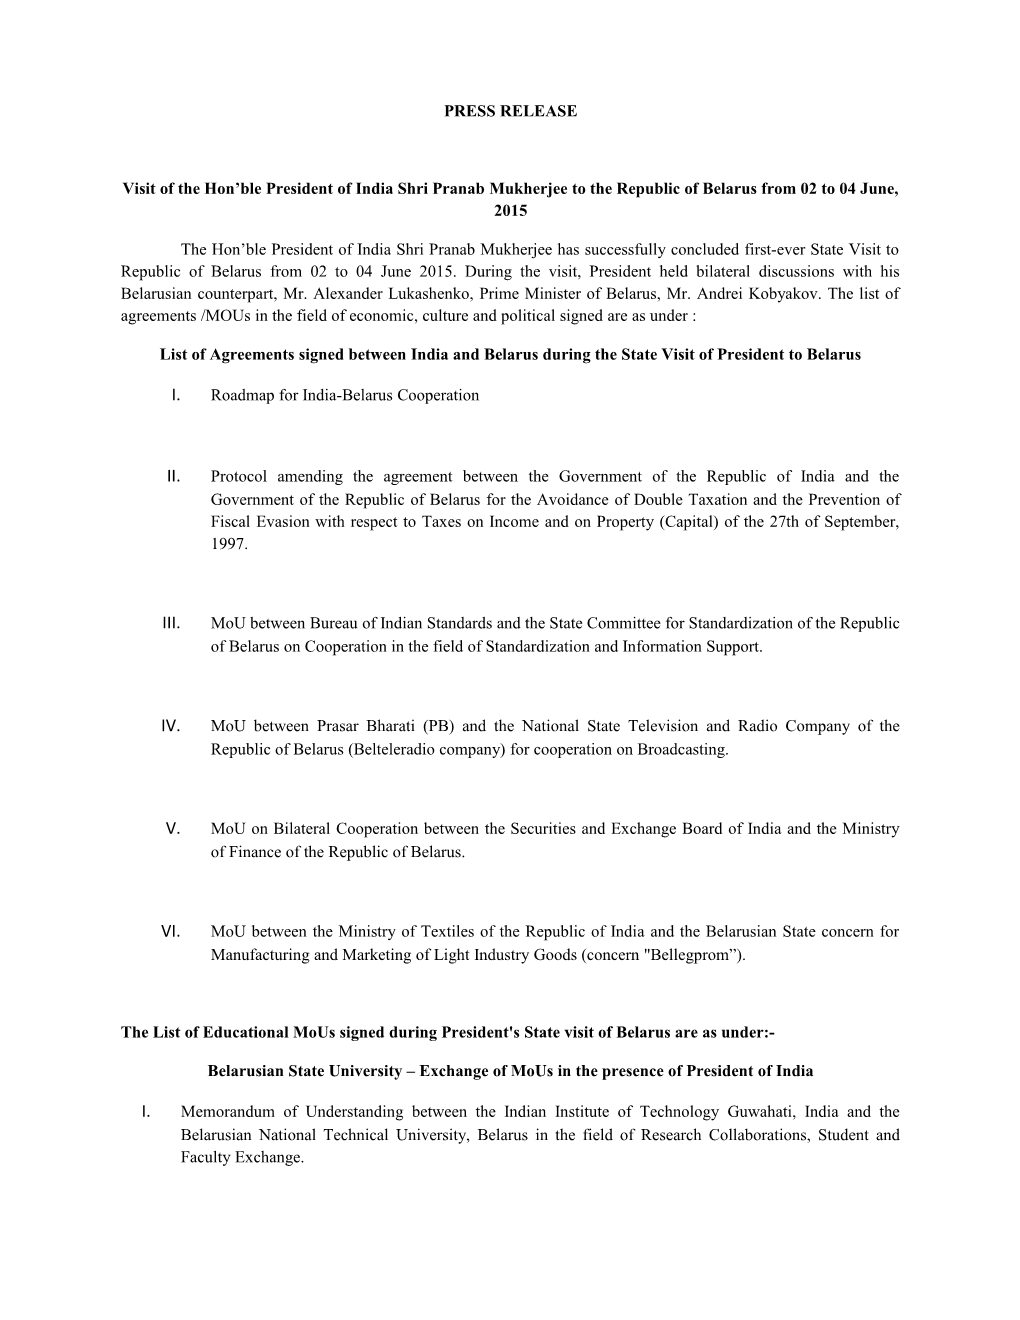 List of Agreements Signed Between India and Belarus During the State Visit of President